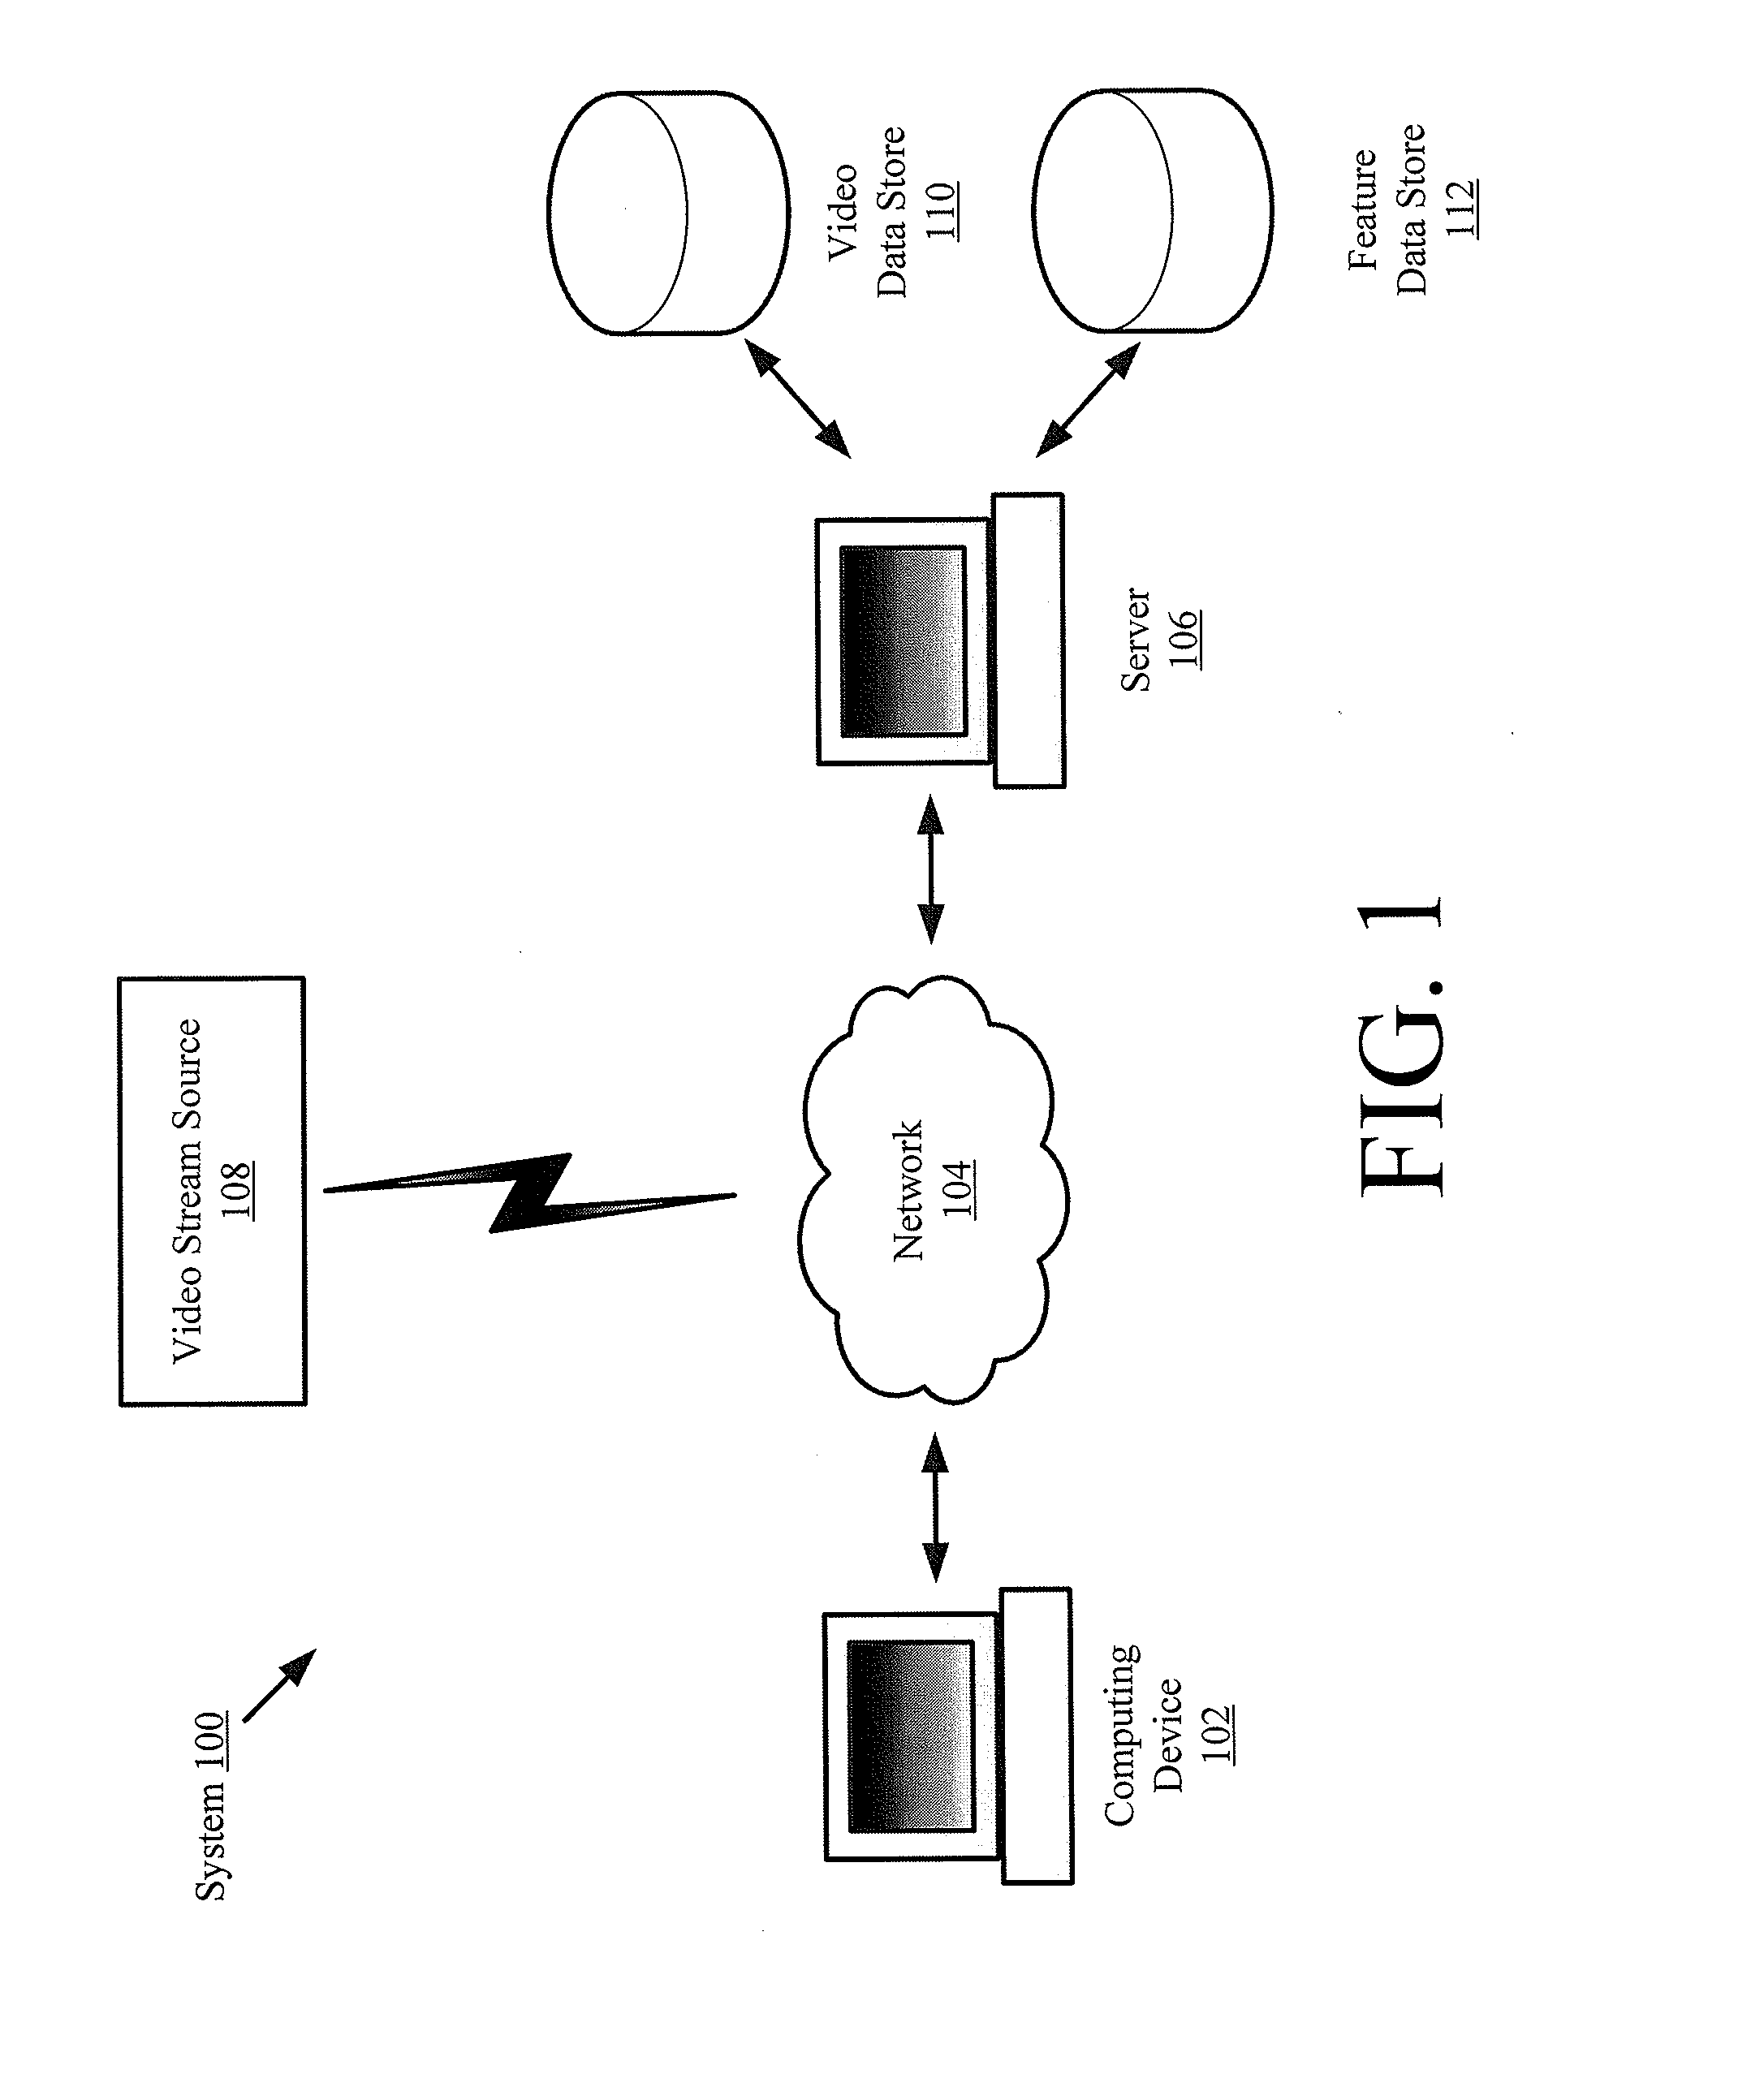 Systems and methods for efficient video analysis